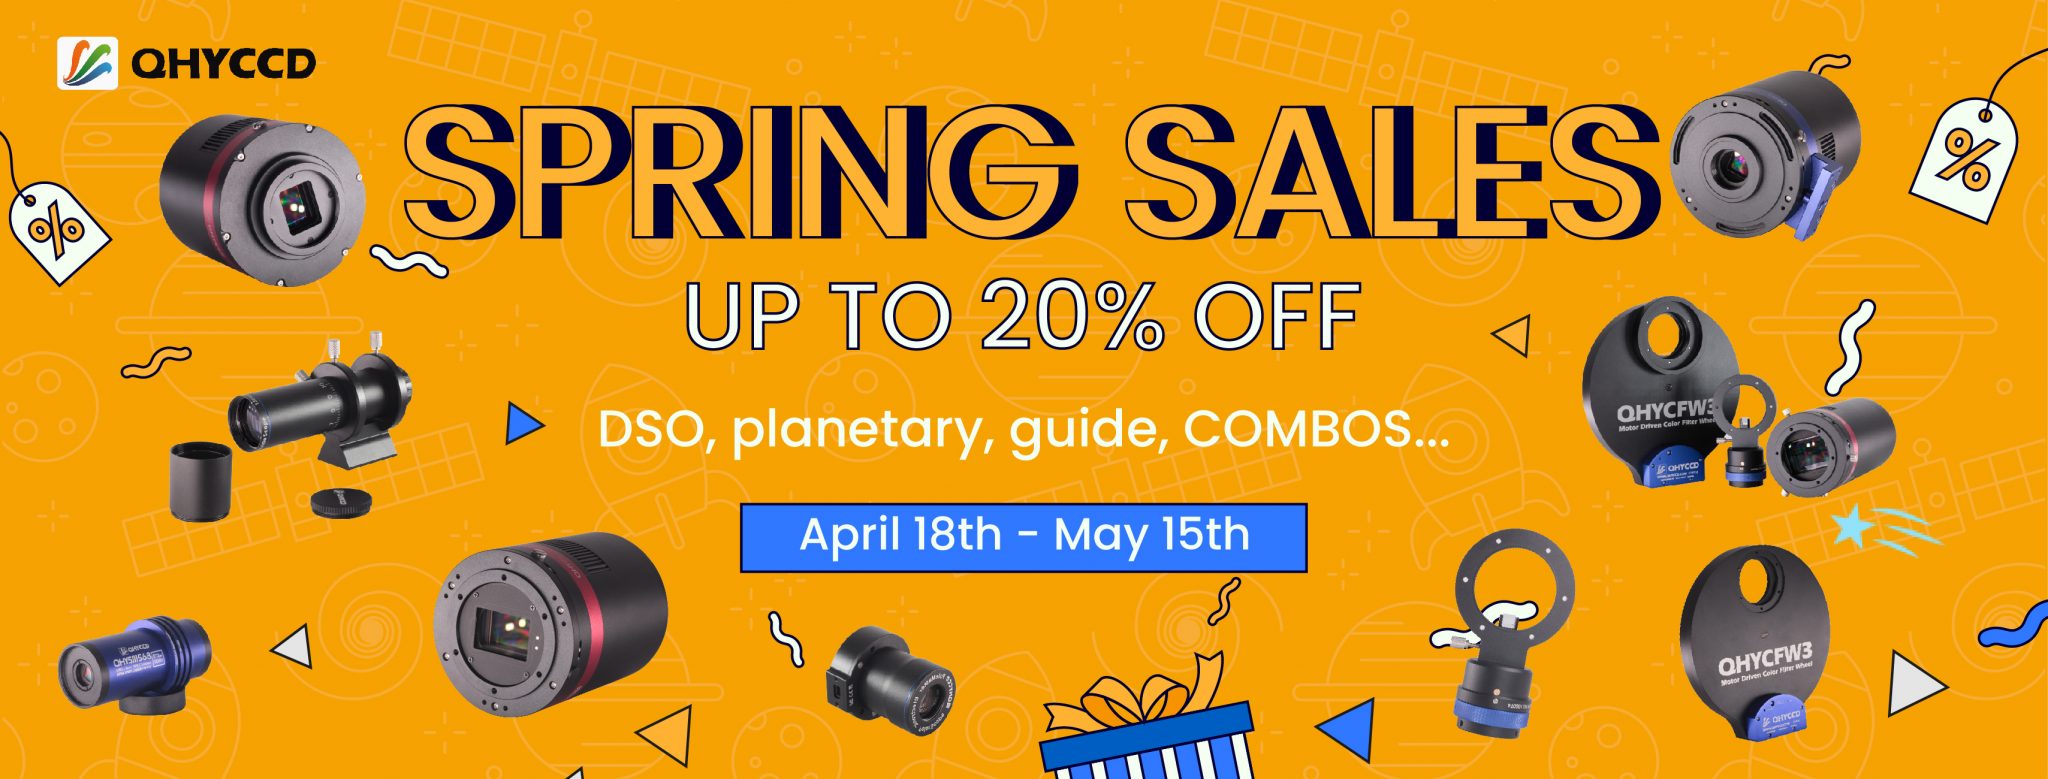 Our Spring Sales comes!